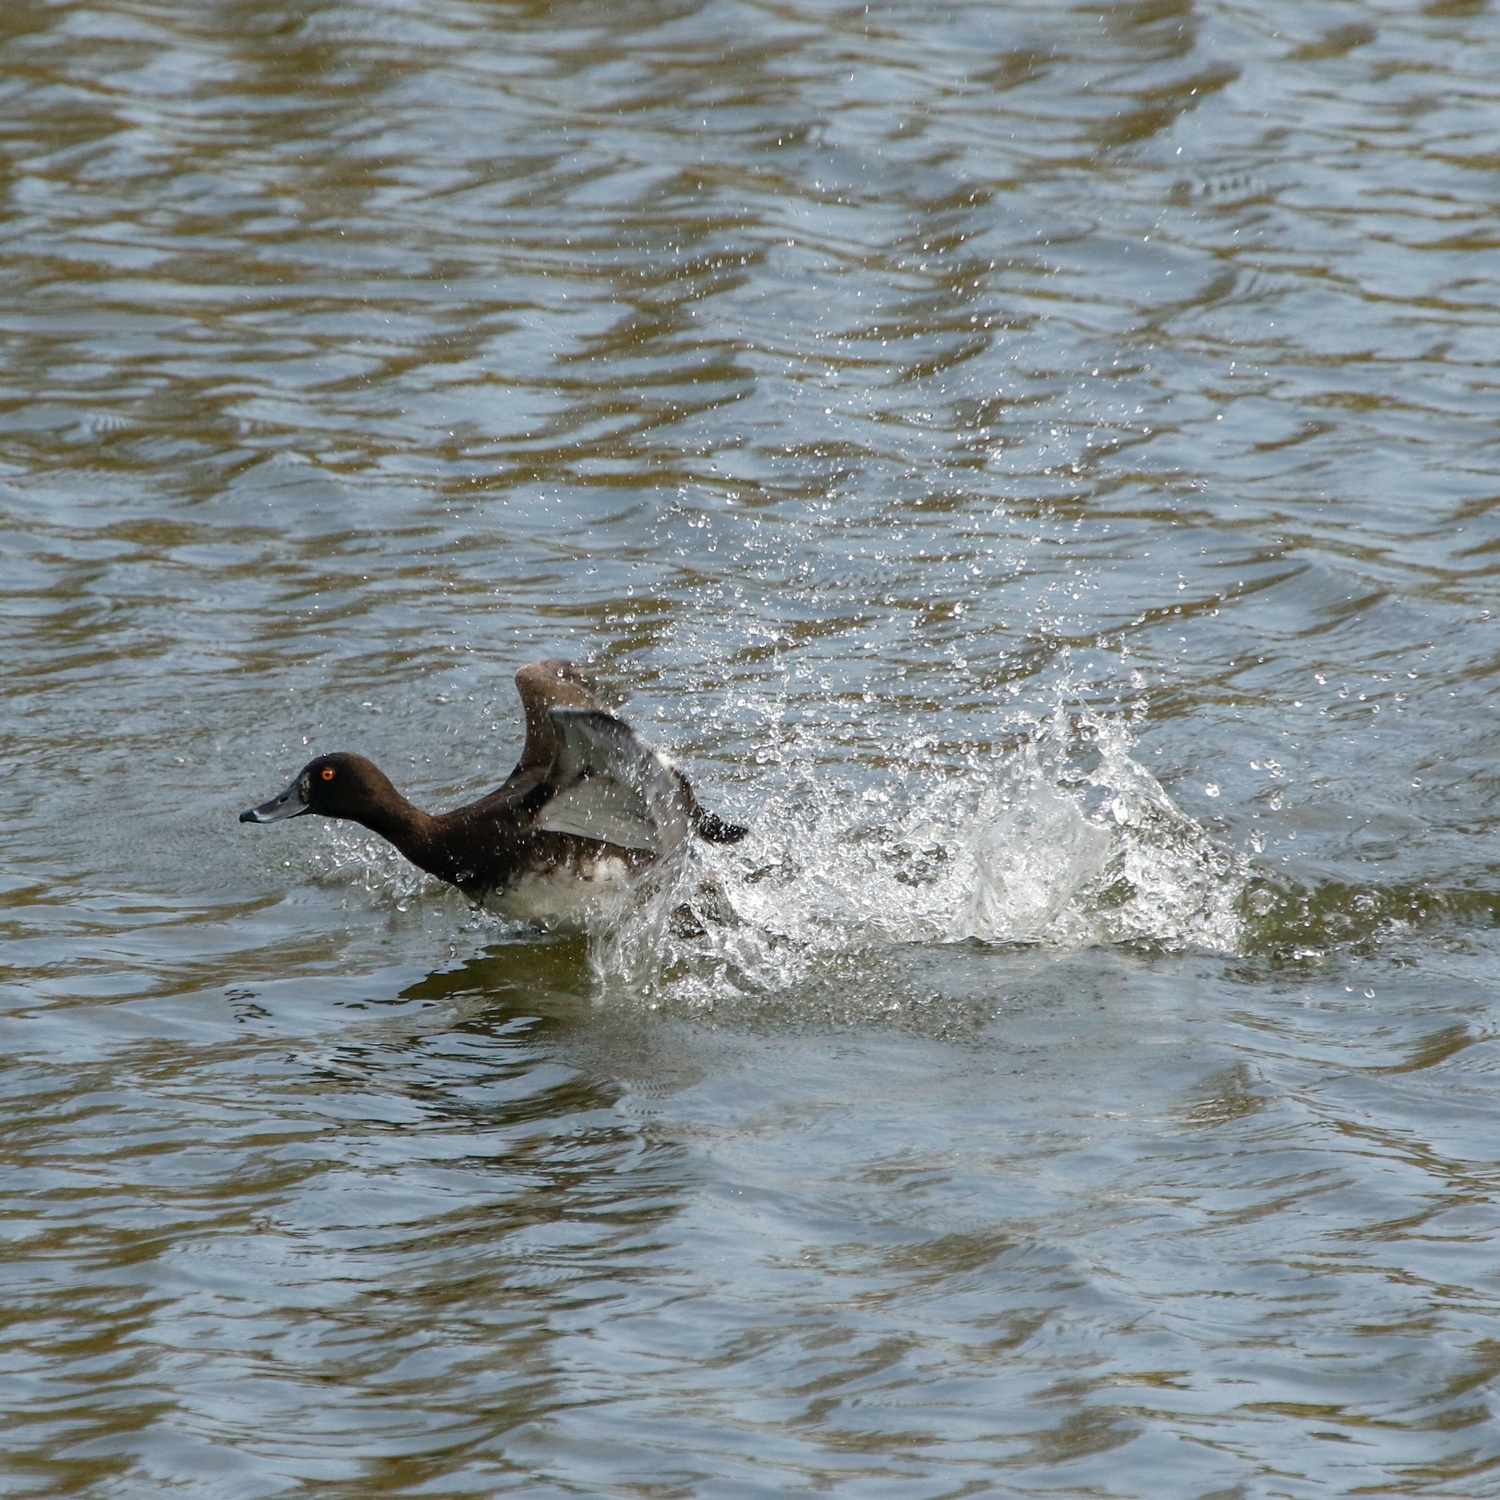 Tufted duck side on landing in pond causig a splash